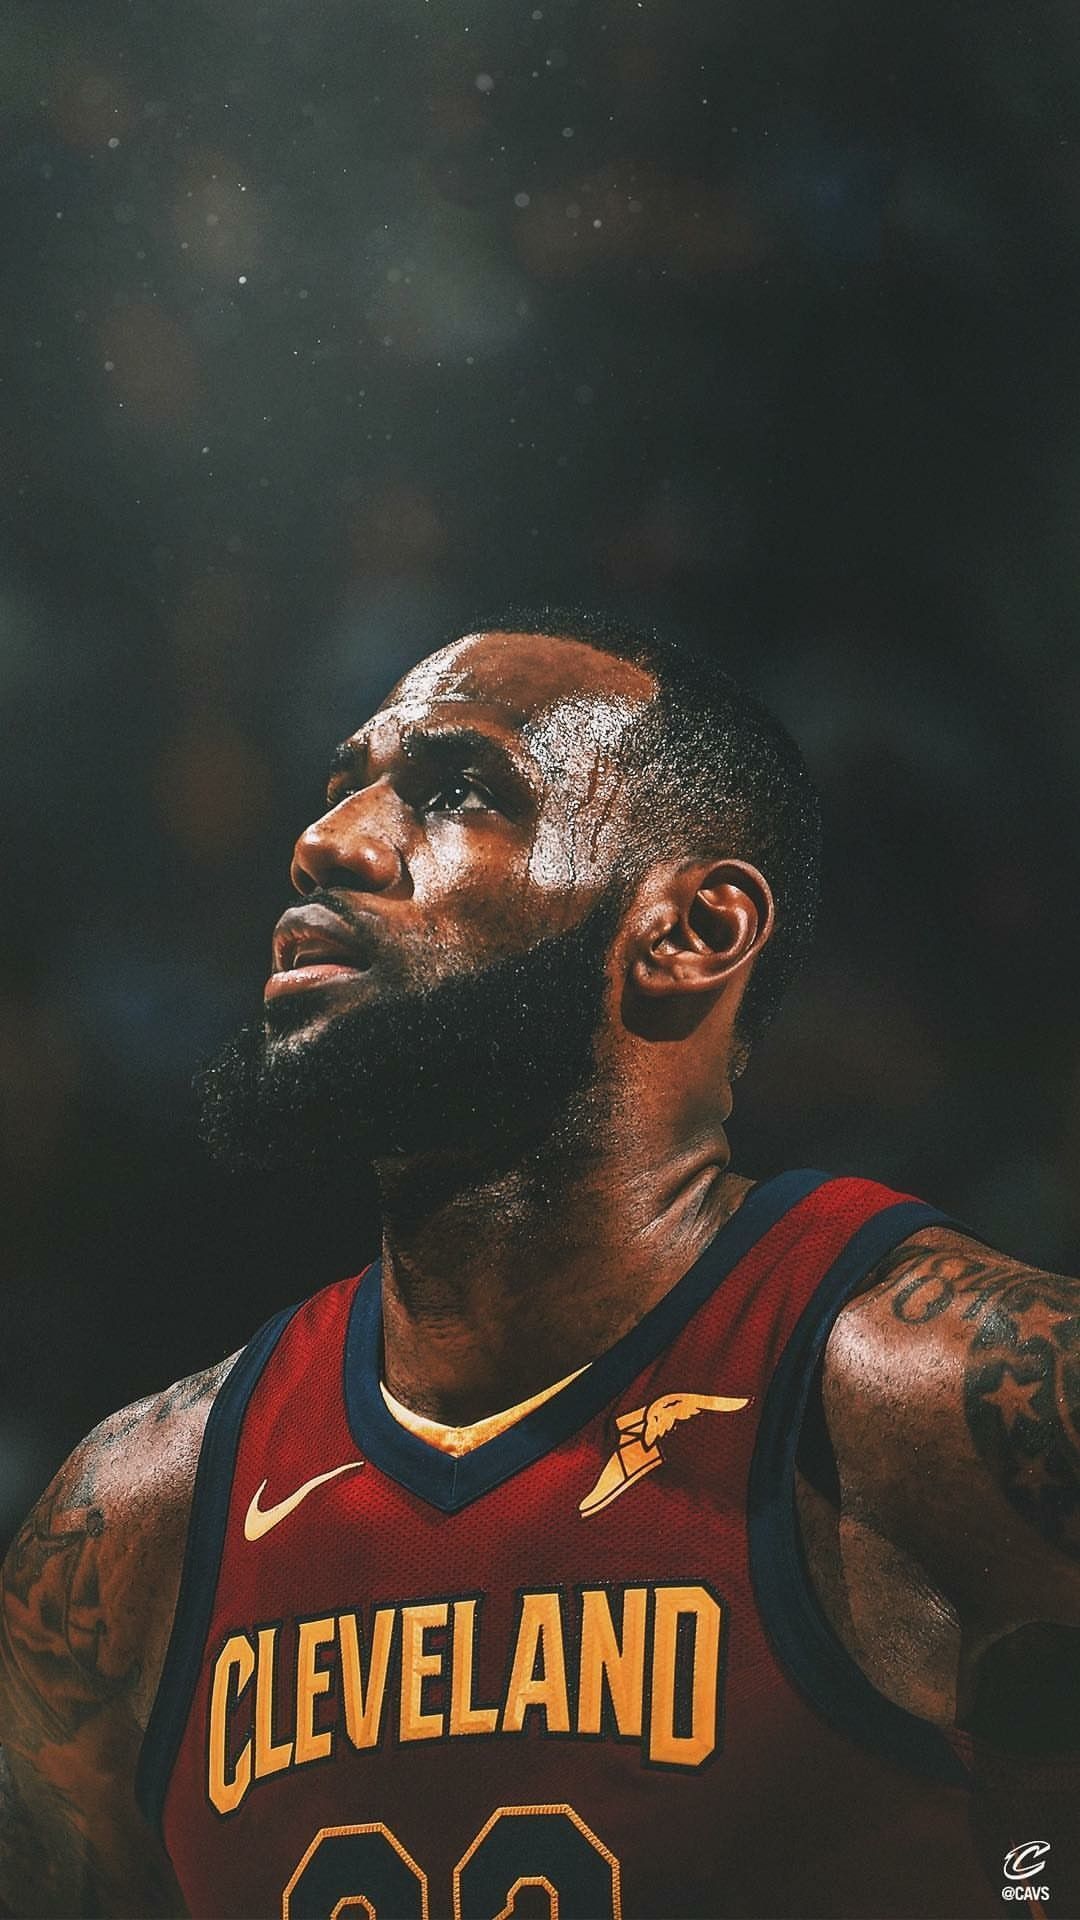 LEBRON JAMES WALLPAPER. Lebron james wallpaper, Lebron james lakers